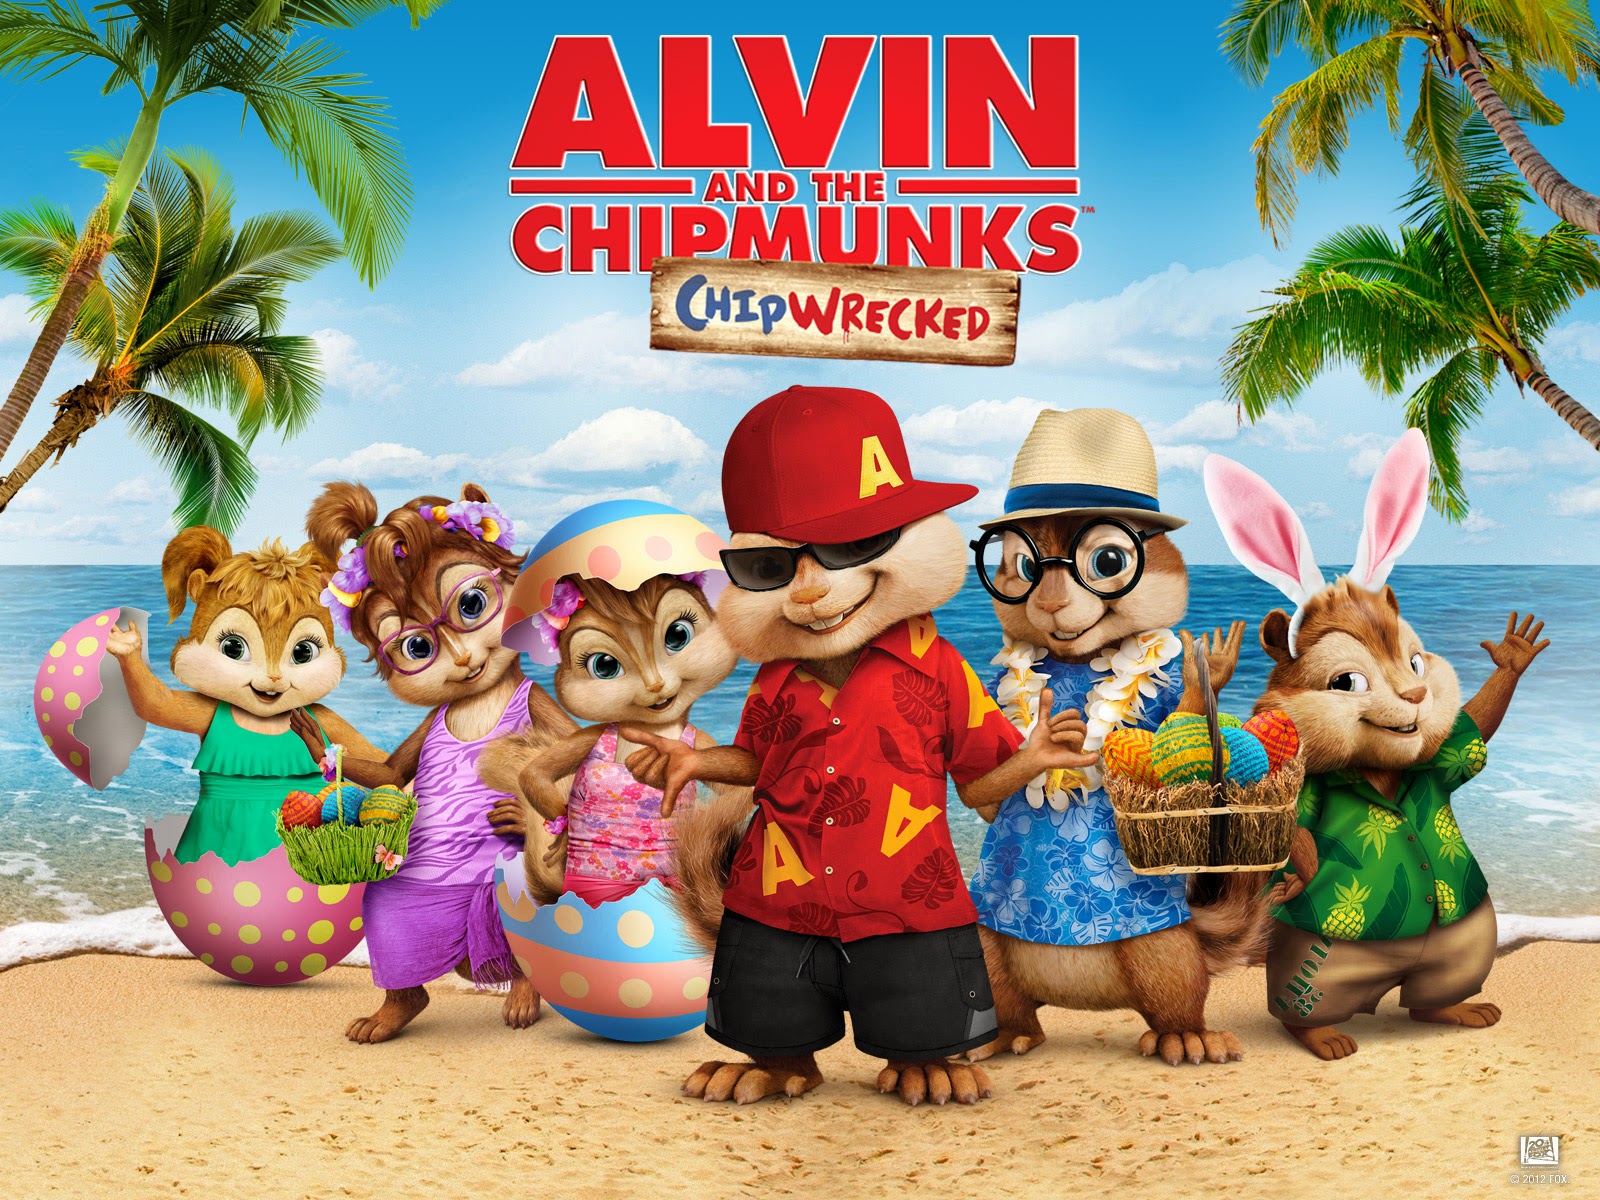 WALLPAPER ANDROID   IPHONE Wallpaper Alvin and The Chipmunks